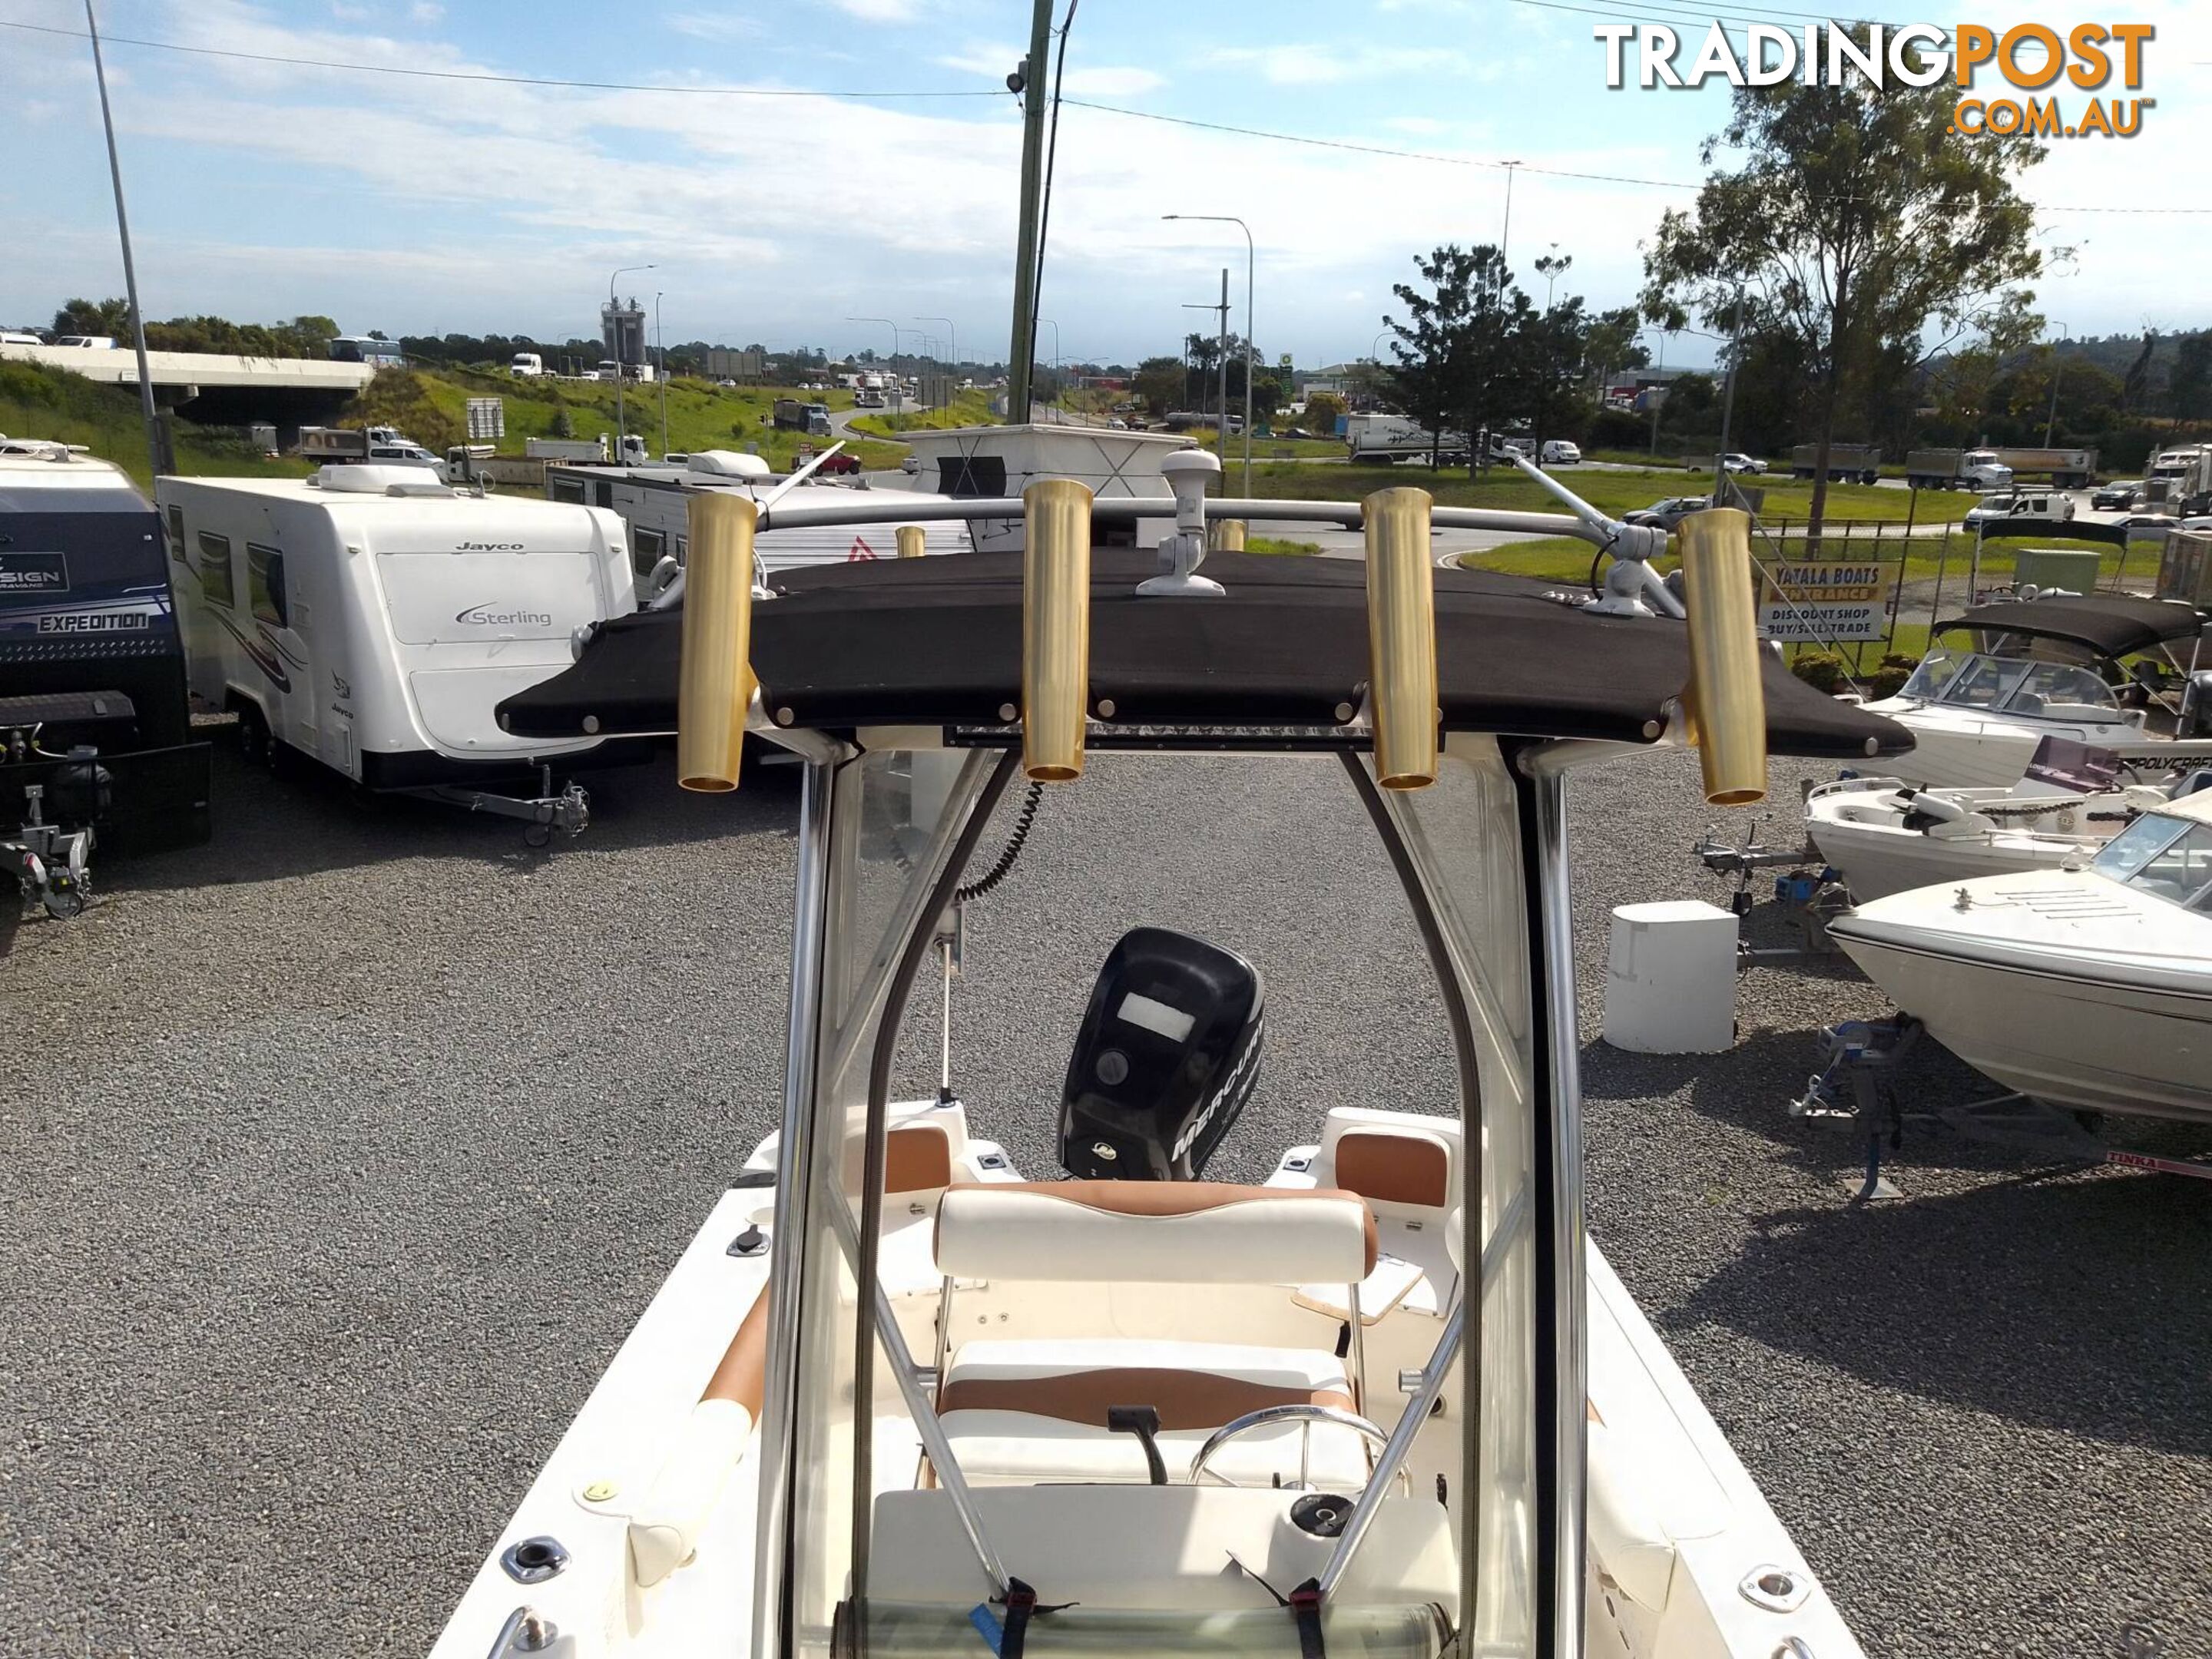 TROPHY 1703 CENTRE CONSOLE - 115HP MERCURY OPTIMAX AND TRAILER